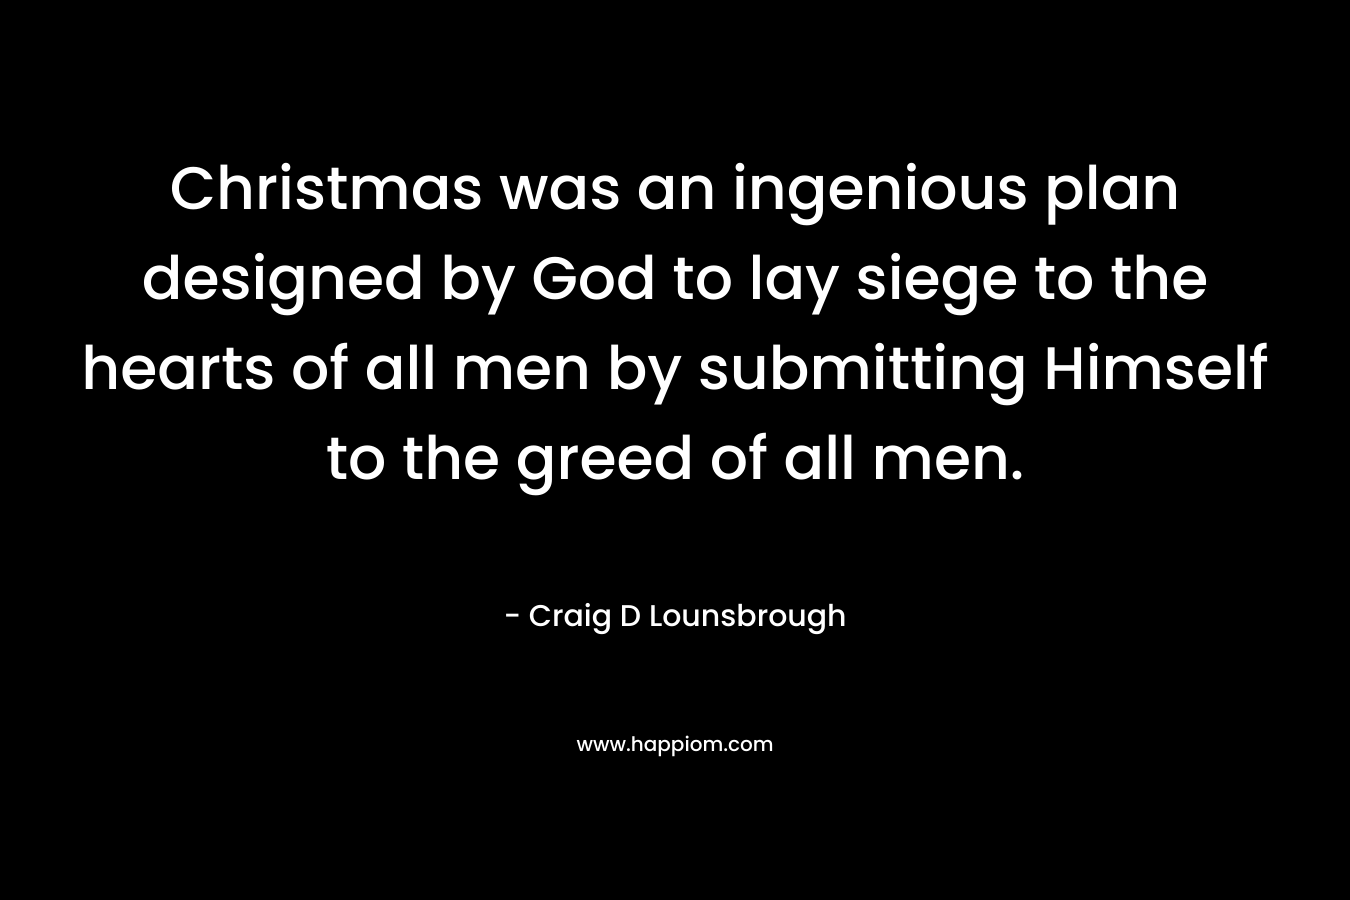 Christmas was an ingenious plan designed by God to lay siege to the hearts of all men by submitting Himself to the greed of all men. – Craig D Lounsbrough